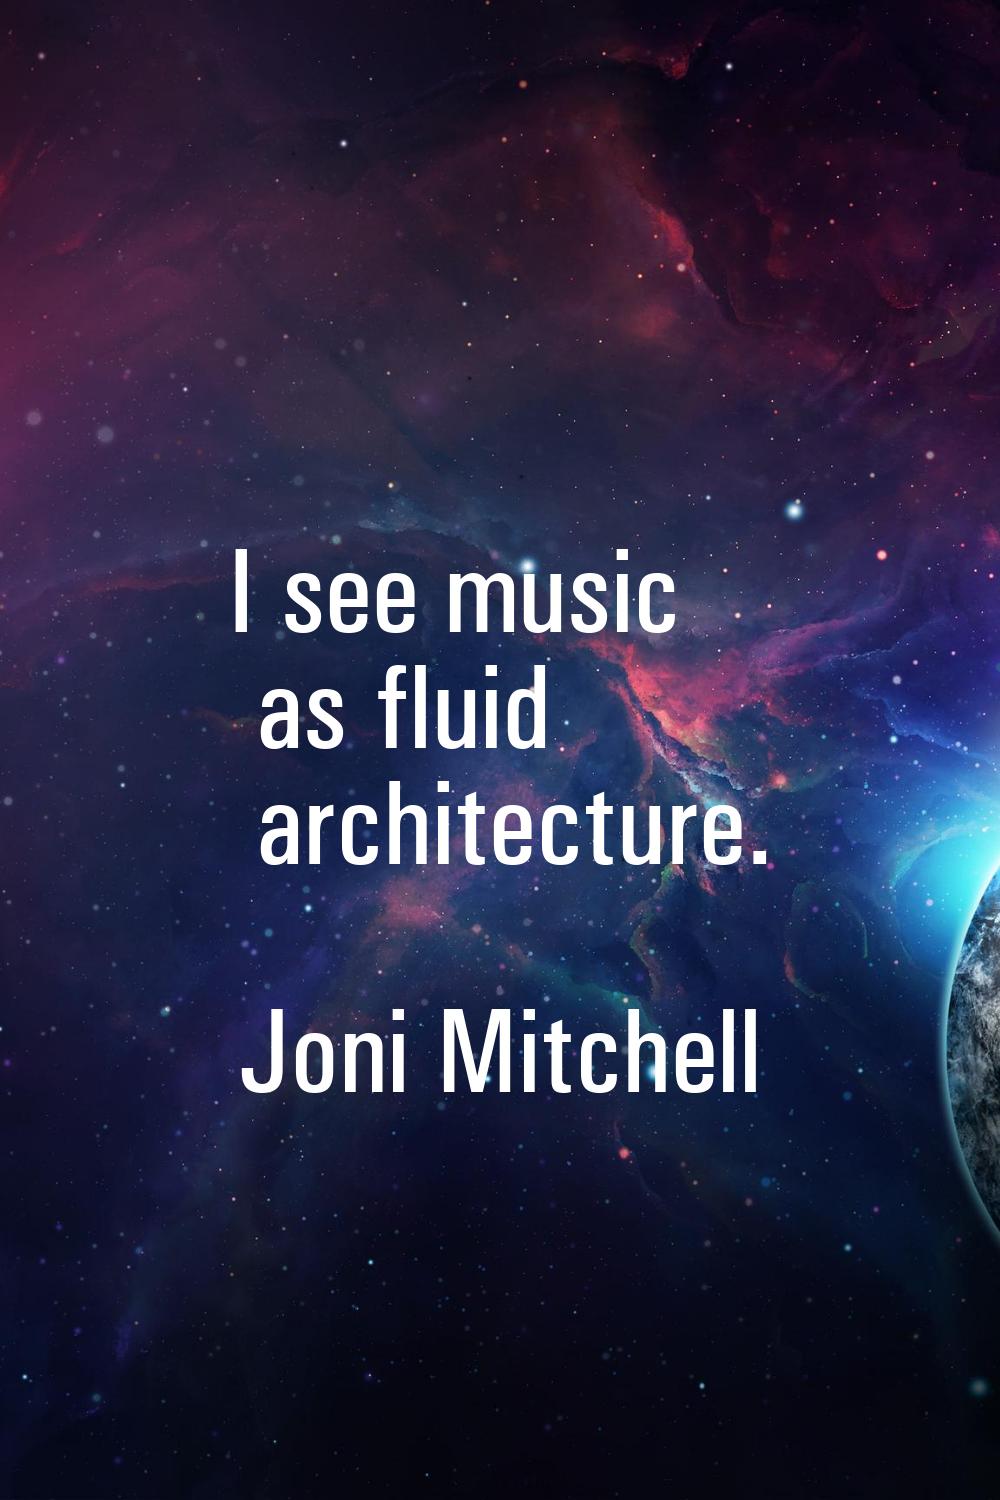 I see music as fluid architecture.